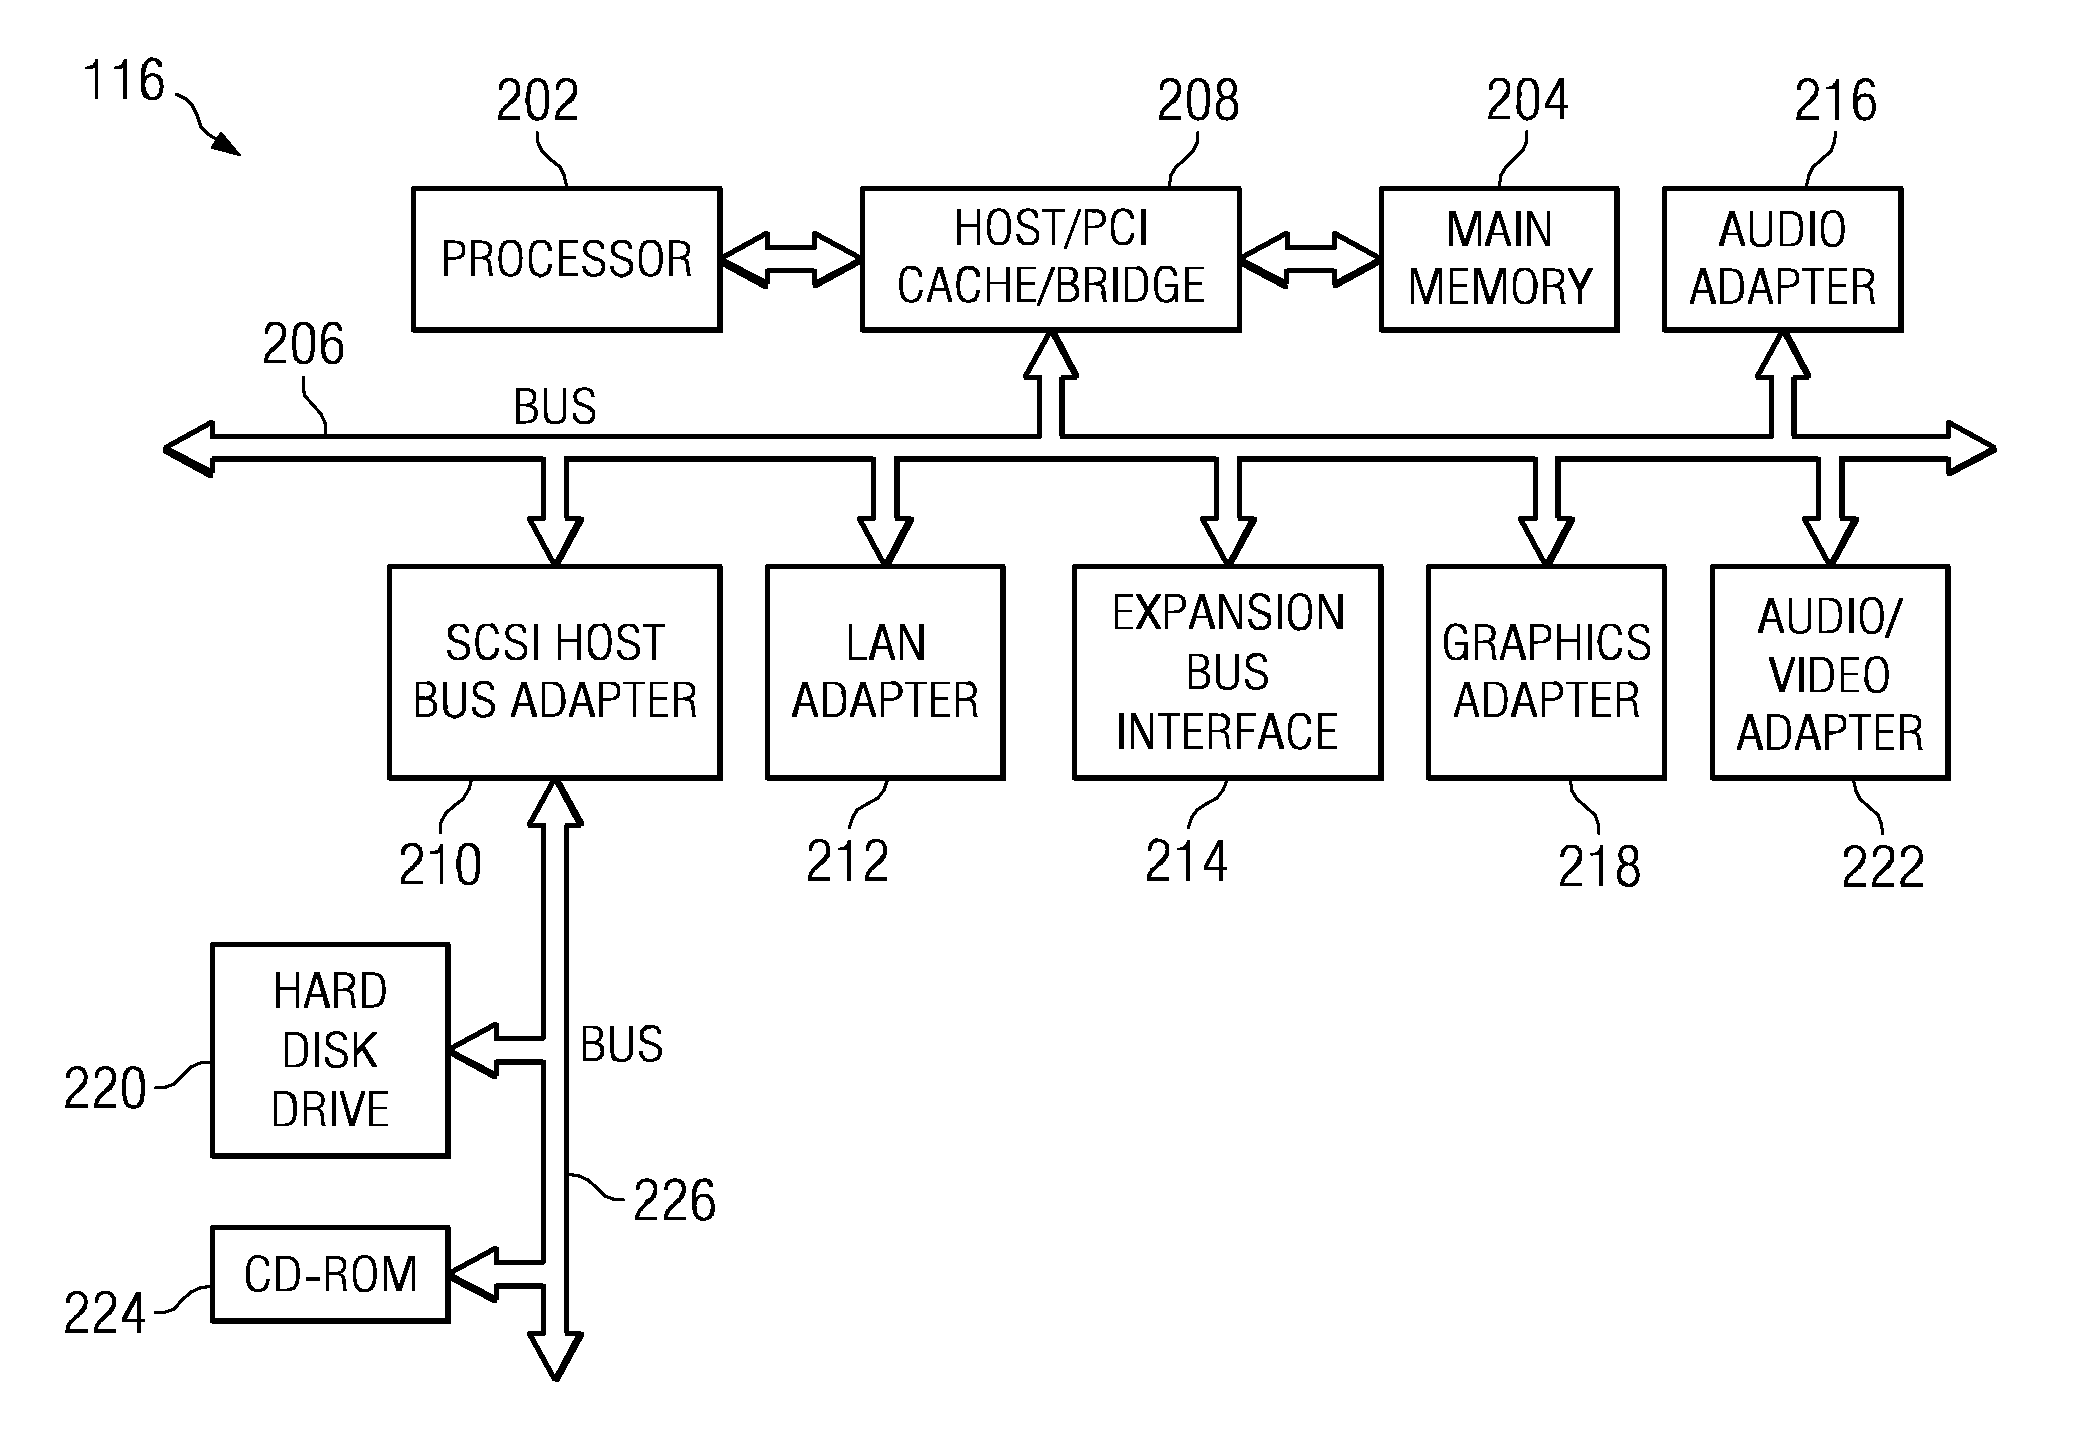 Method for determining priority for installing a patch into multiple patch recipients of a network